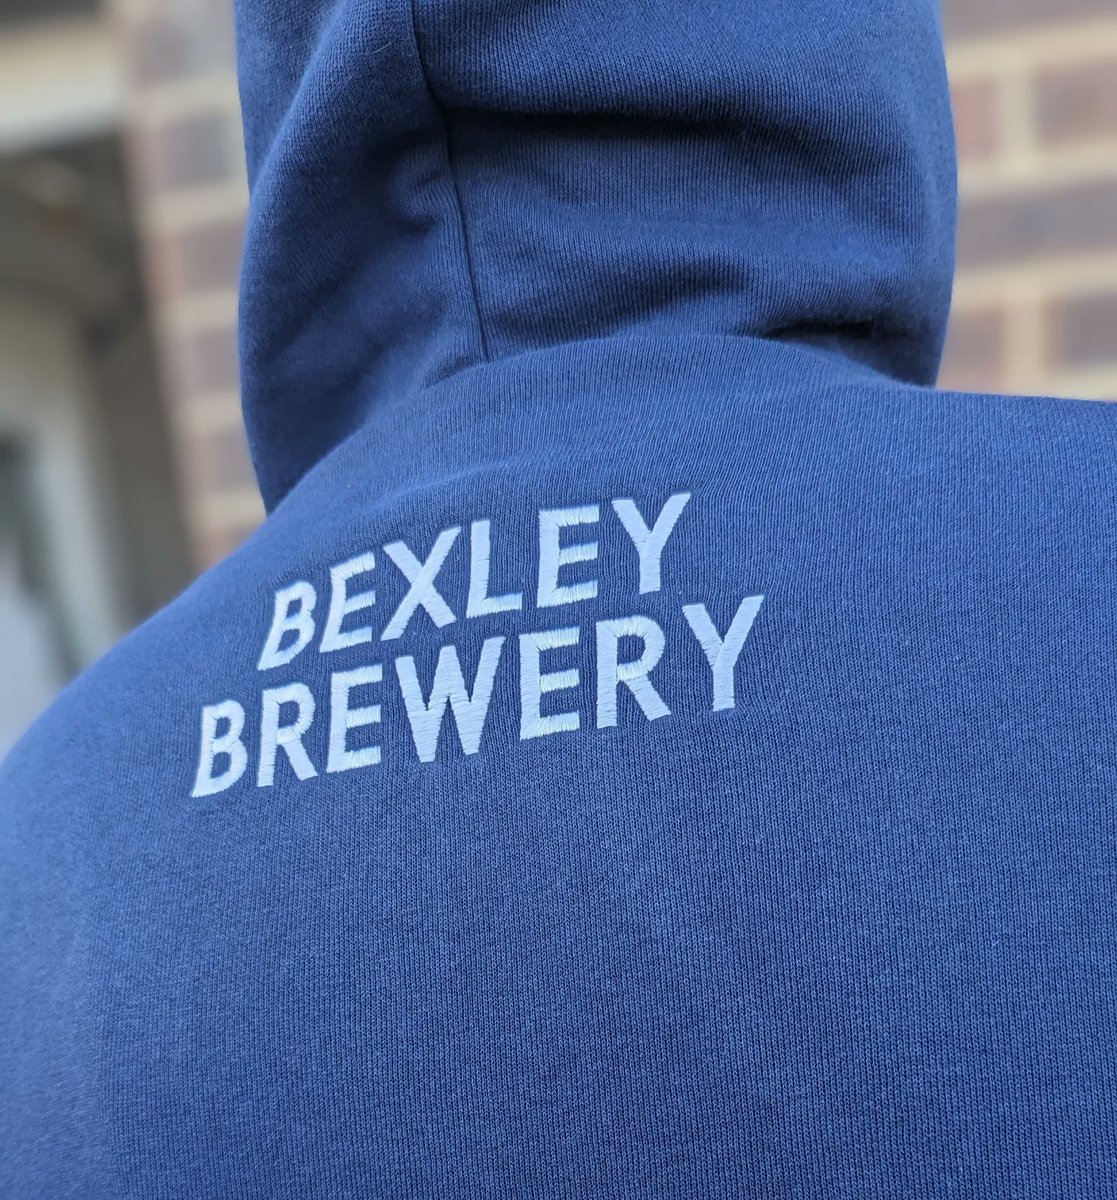 We're having a merch sale over on our webshop!🥳 It's the last of this style so get it while you can - limited sizes available!👕🧢 T-shirts & Hoodies - 15% off Beanies & Caps - 10% off bexleybrewery.co.uk/webshop